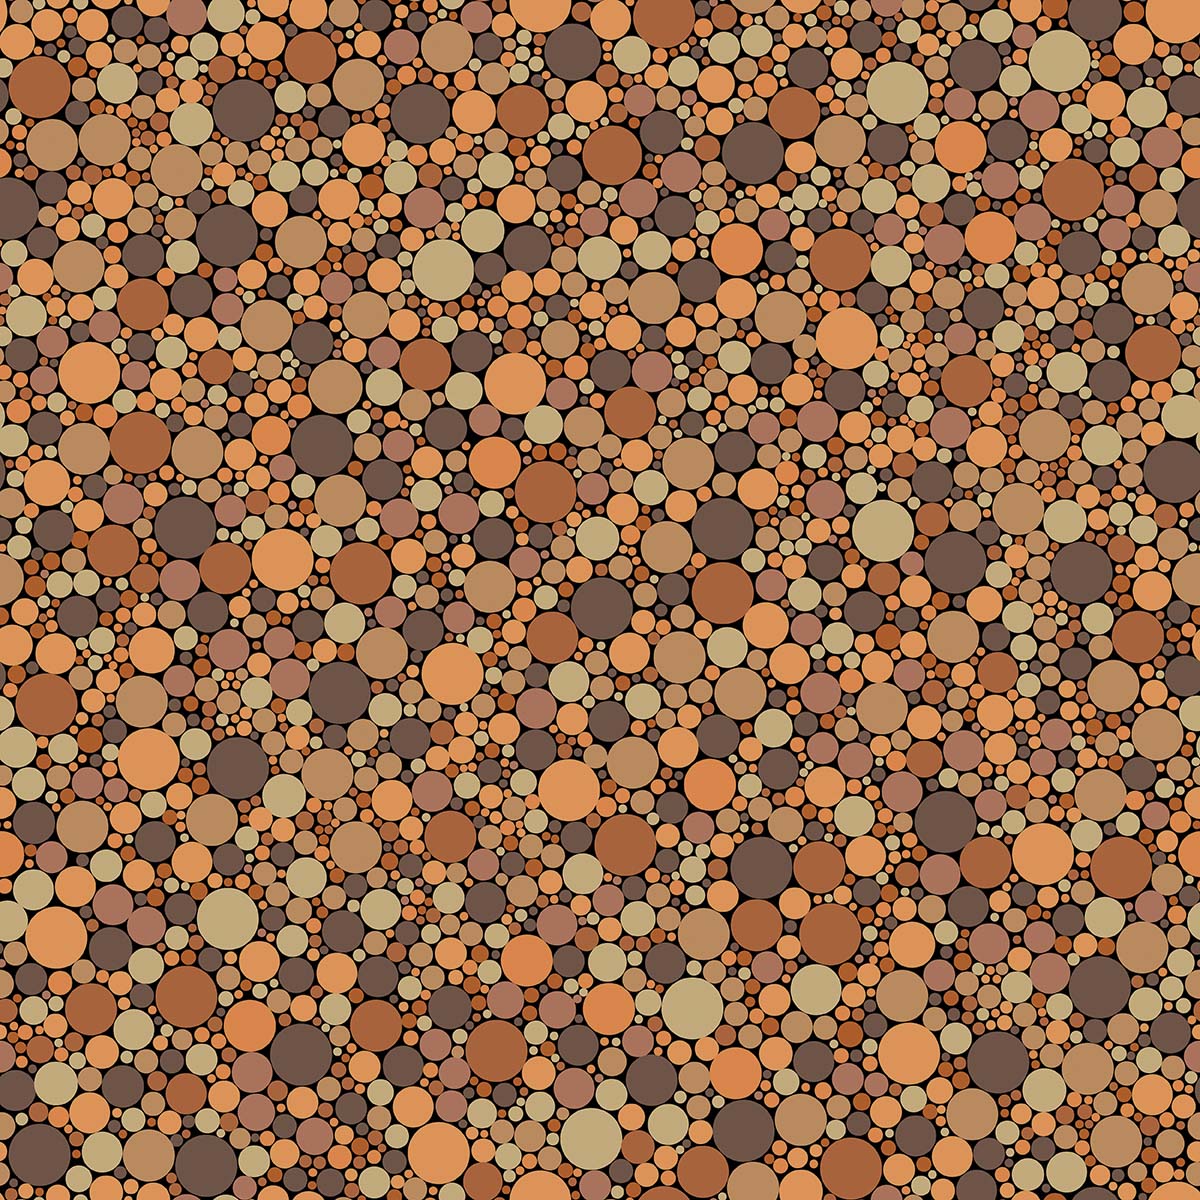 A group of orange and brown circles